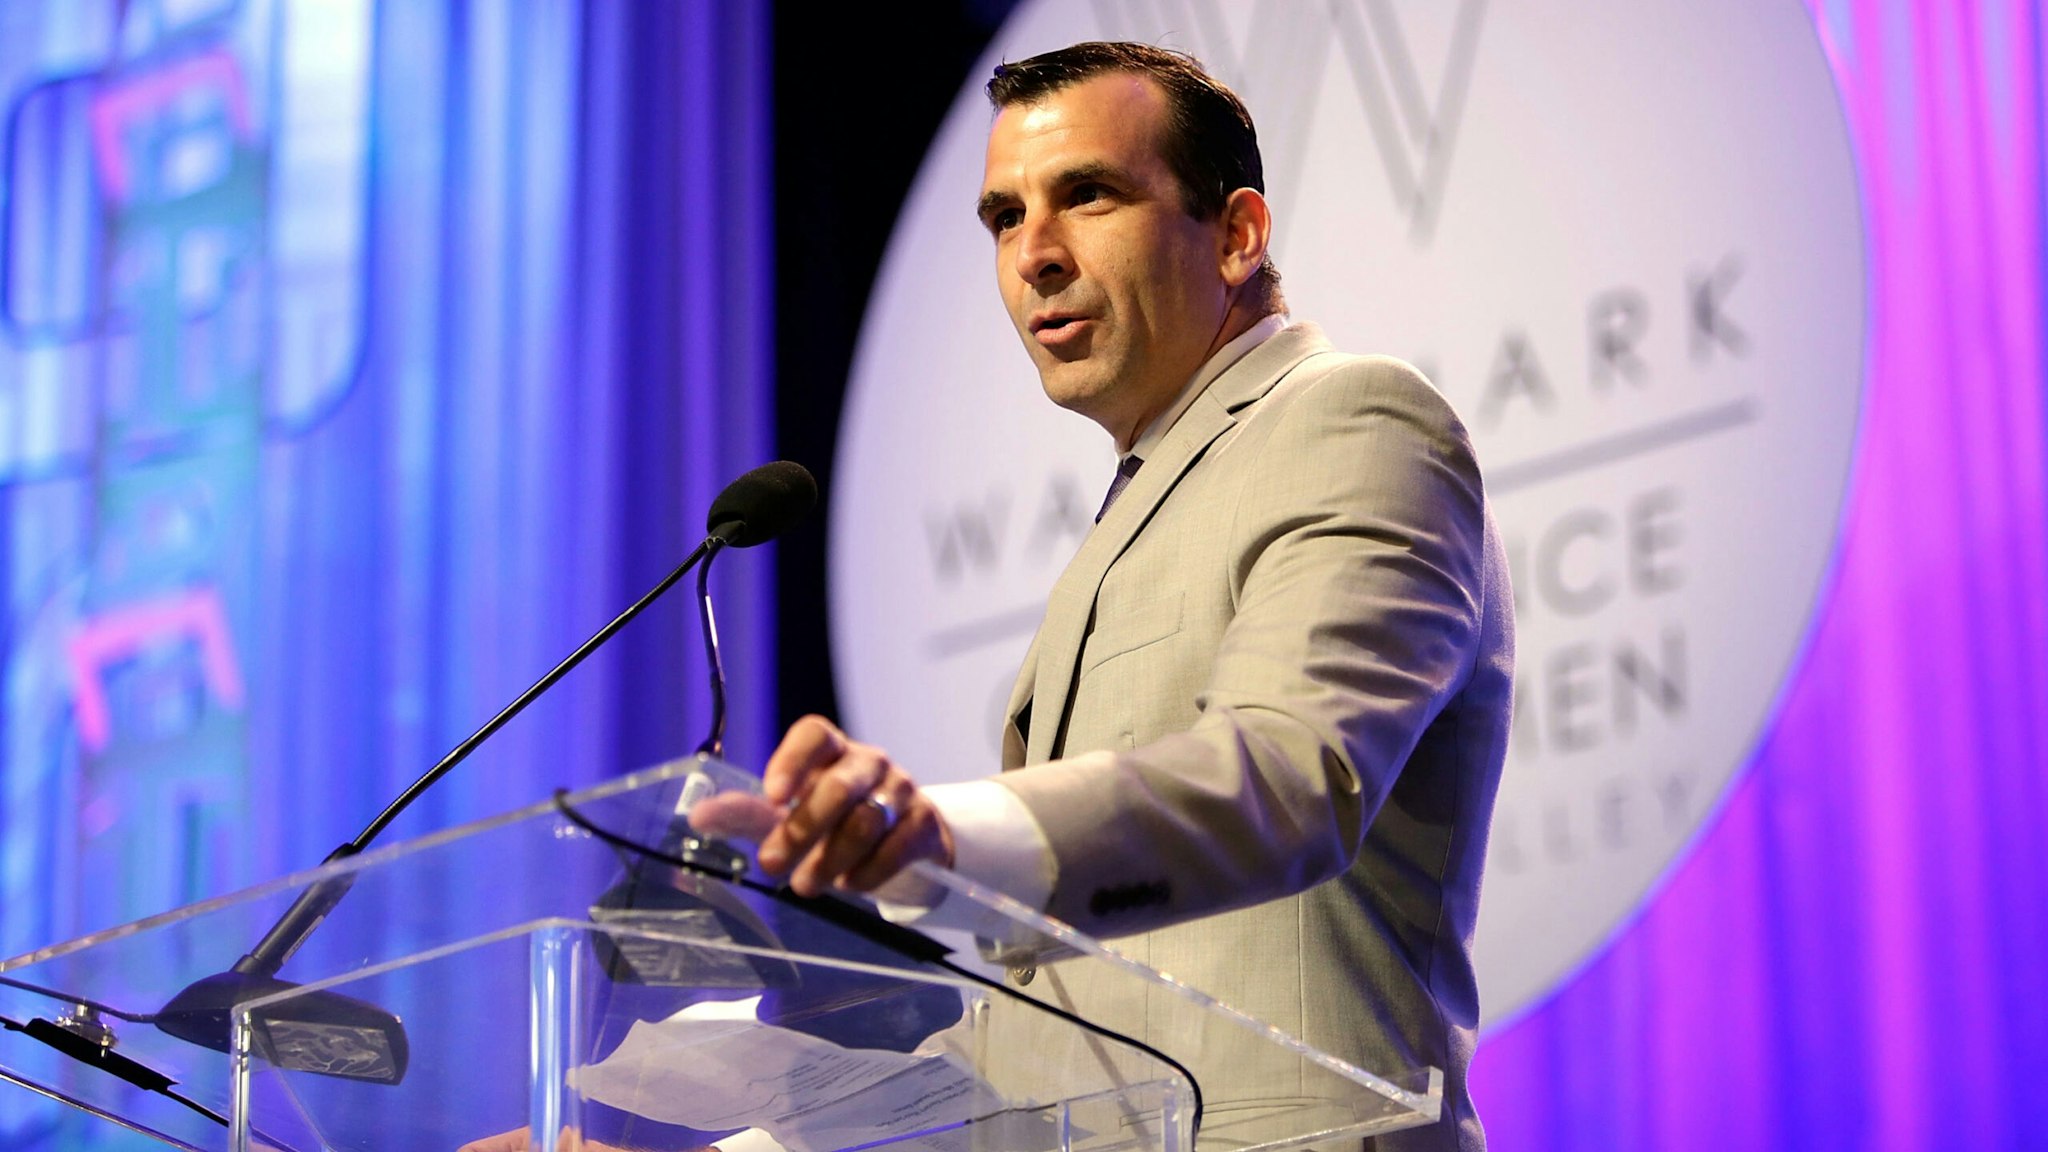 SAN JOSE, CA - APRIL 21: San Jose Mayor Sam Liccardo addresses the audience during the Watermark Conference For Women 2016 at San Jose Convention Center on April 21, 2016 in San Jose, California.